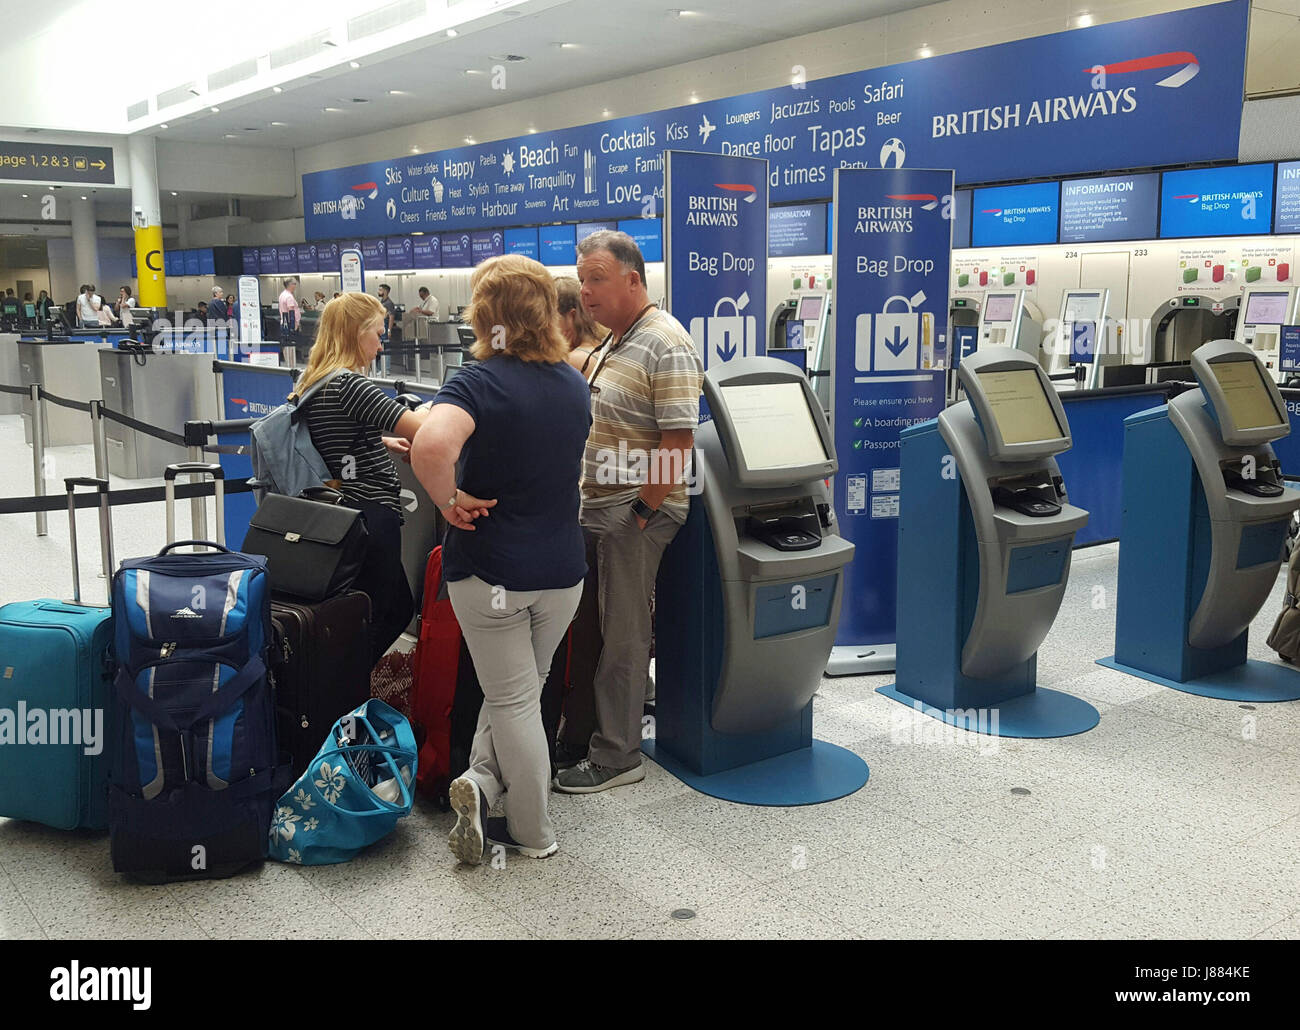 Passengers at the British Airways check-in desk at Gatwick Airport. The airline says it has cancelled all flights leaving from Heathrow and Gatwick for the rest of today because of a 'major IT system failure'. Stock Photo